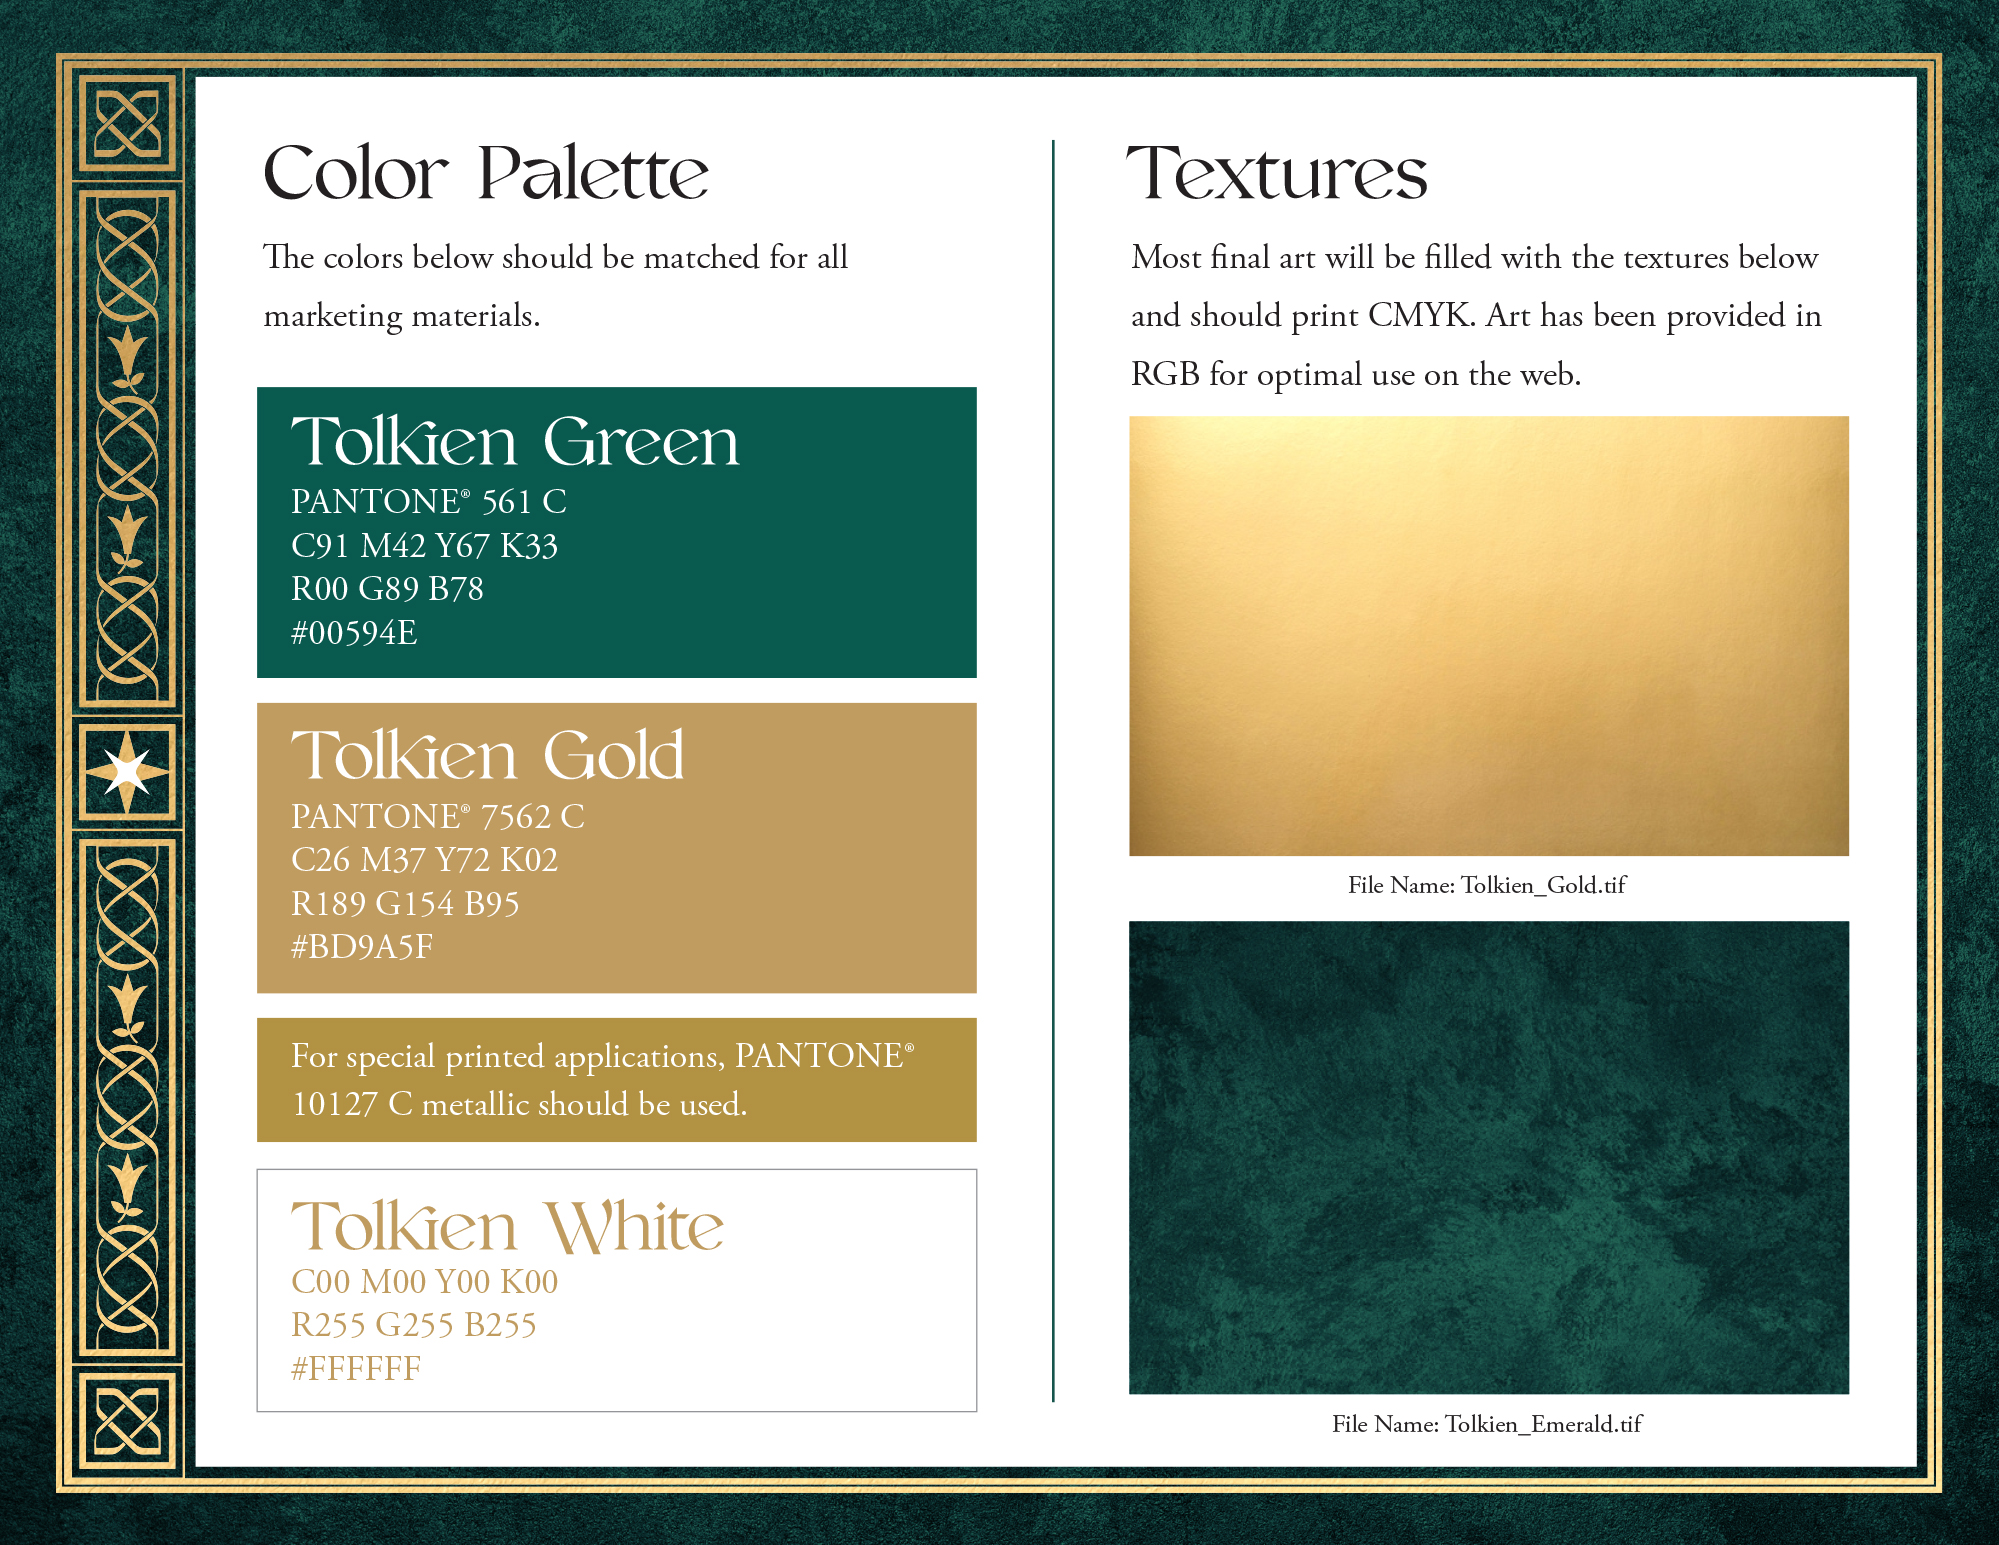 Tolkien Marketing Guidelines Colors and Textures